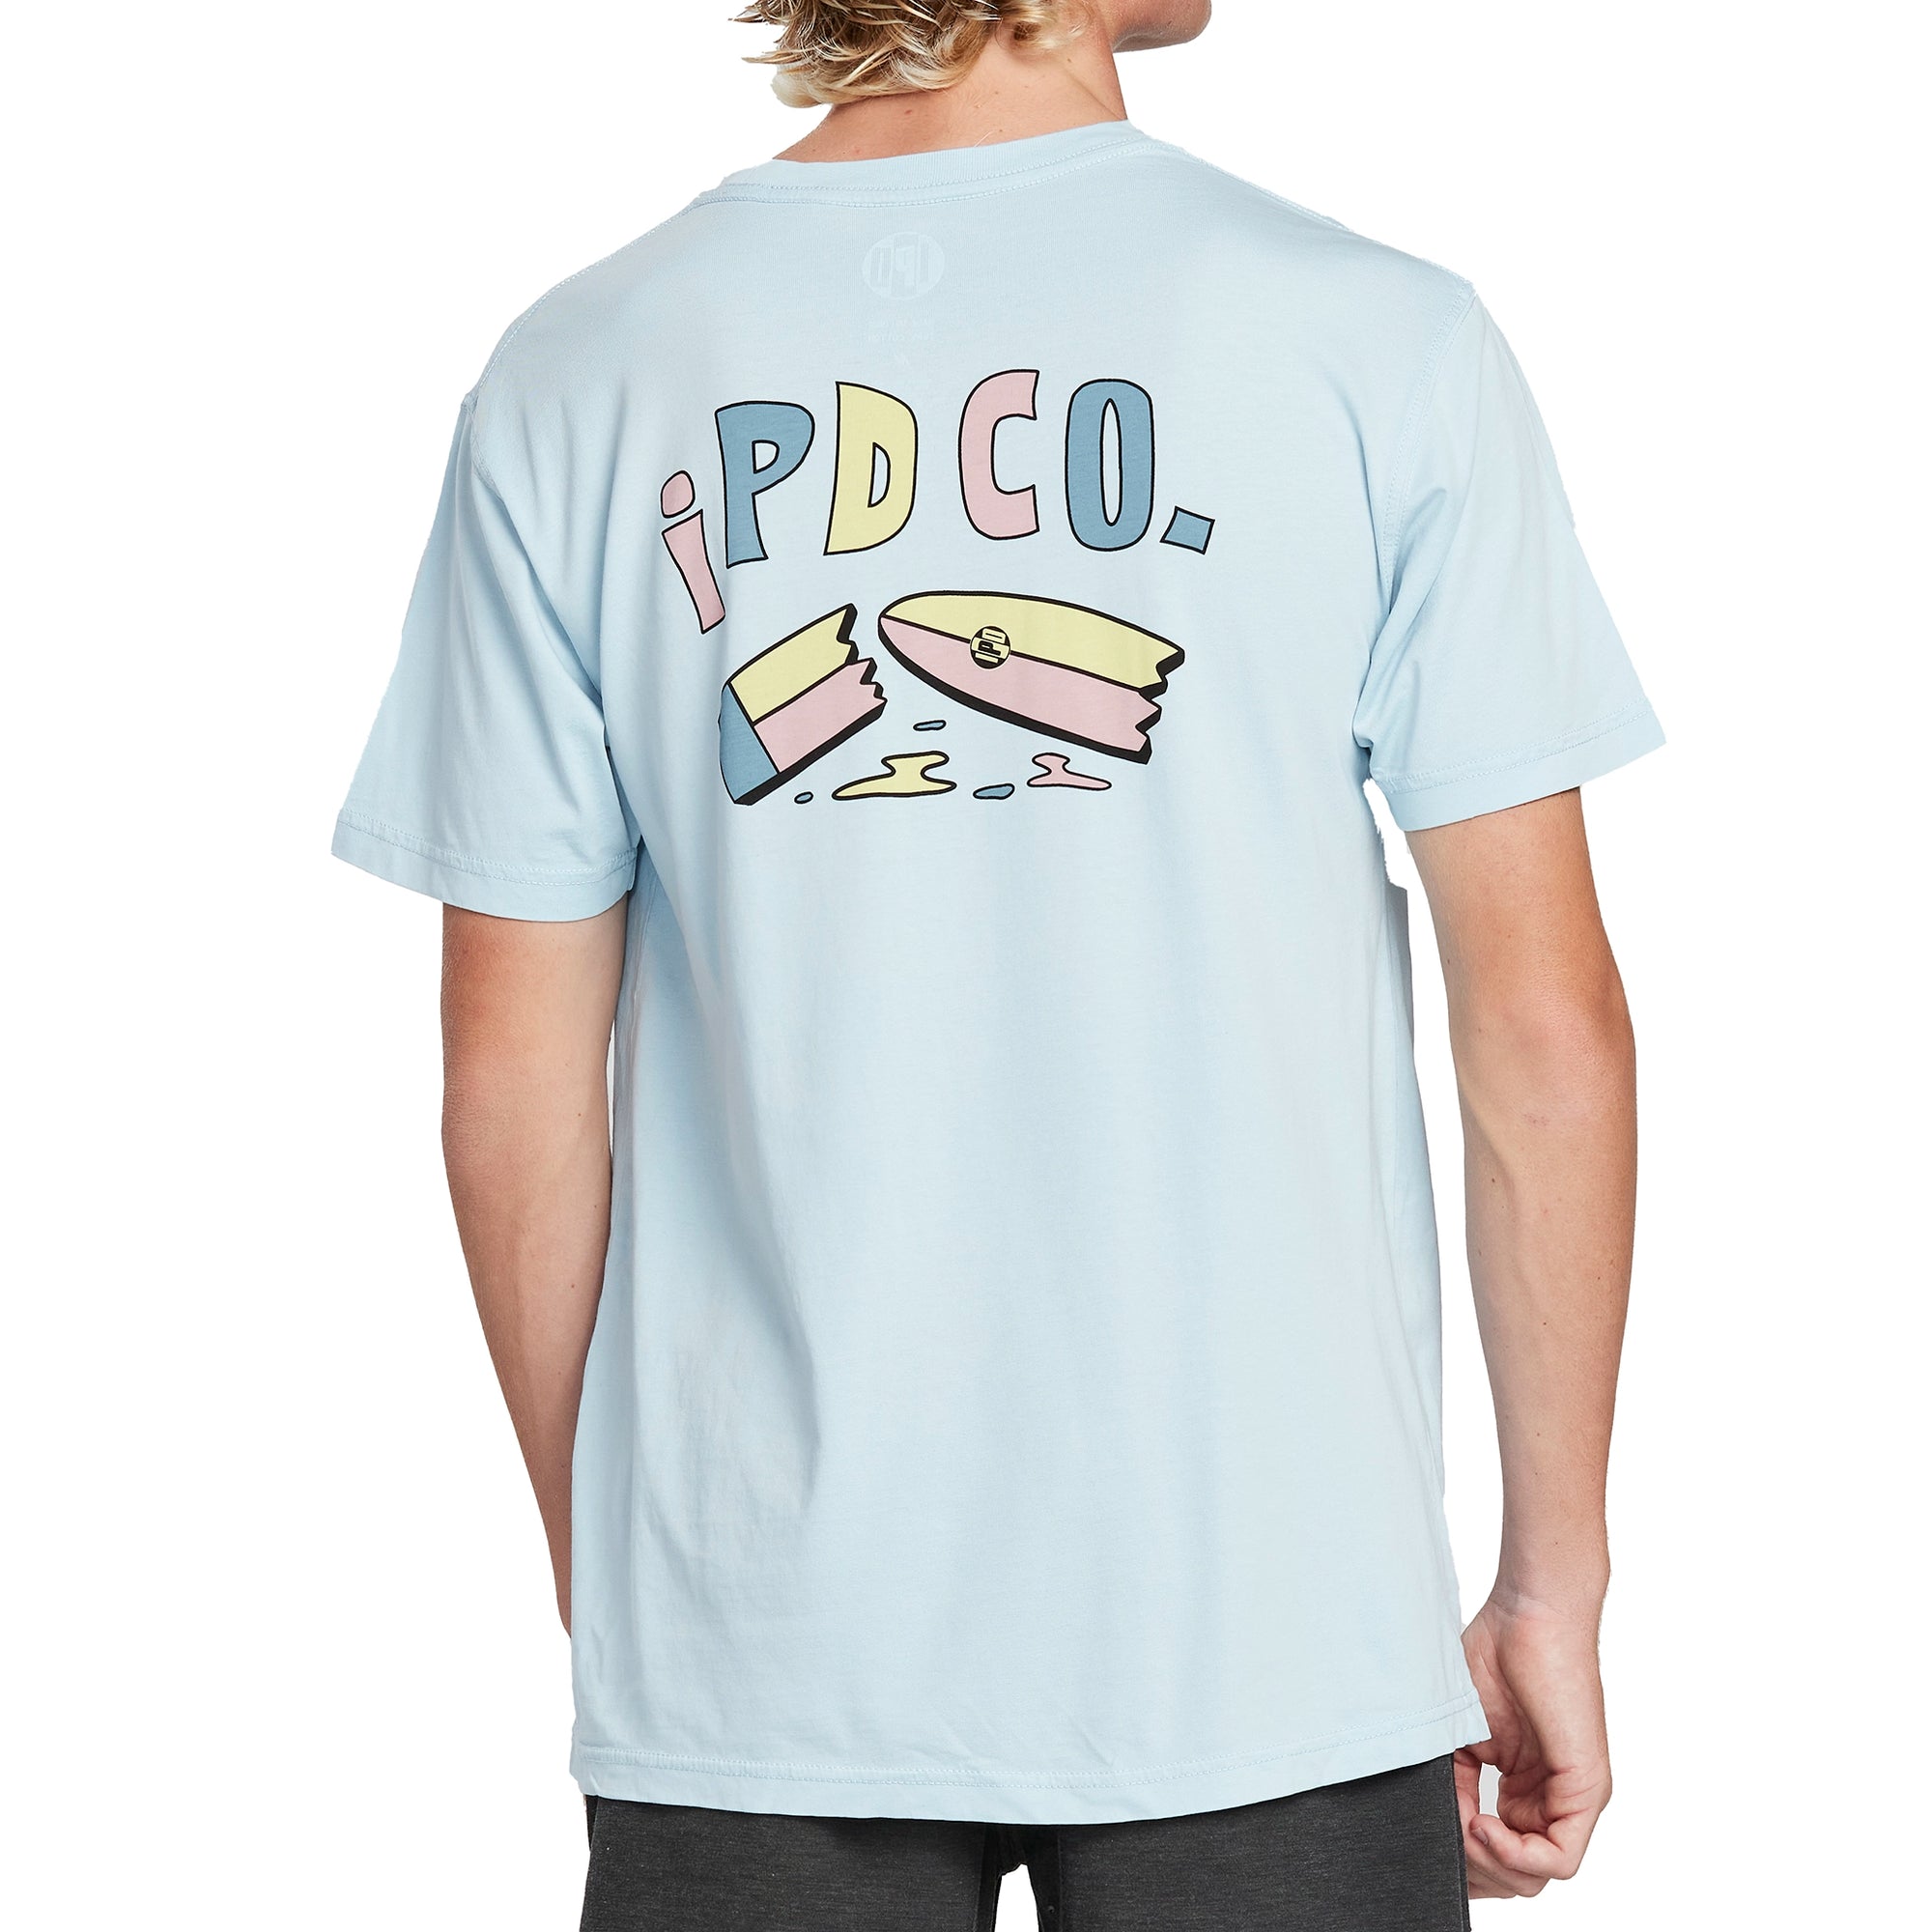 Back of a lemonade yellow short sleeve tee with a large print of a cartoon surfboard broken in half. Above the broken surfboard are the letters I P D C O period in a cartoonish font.